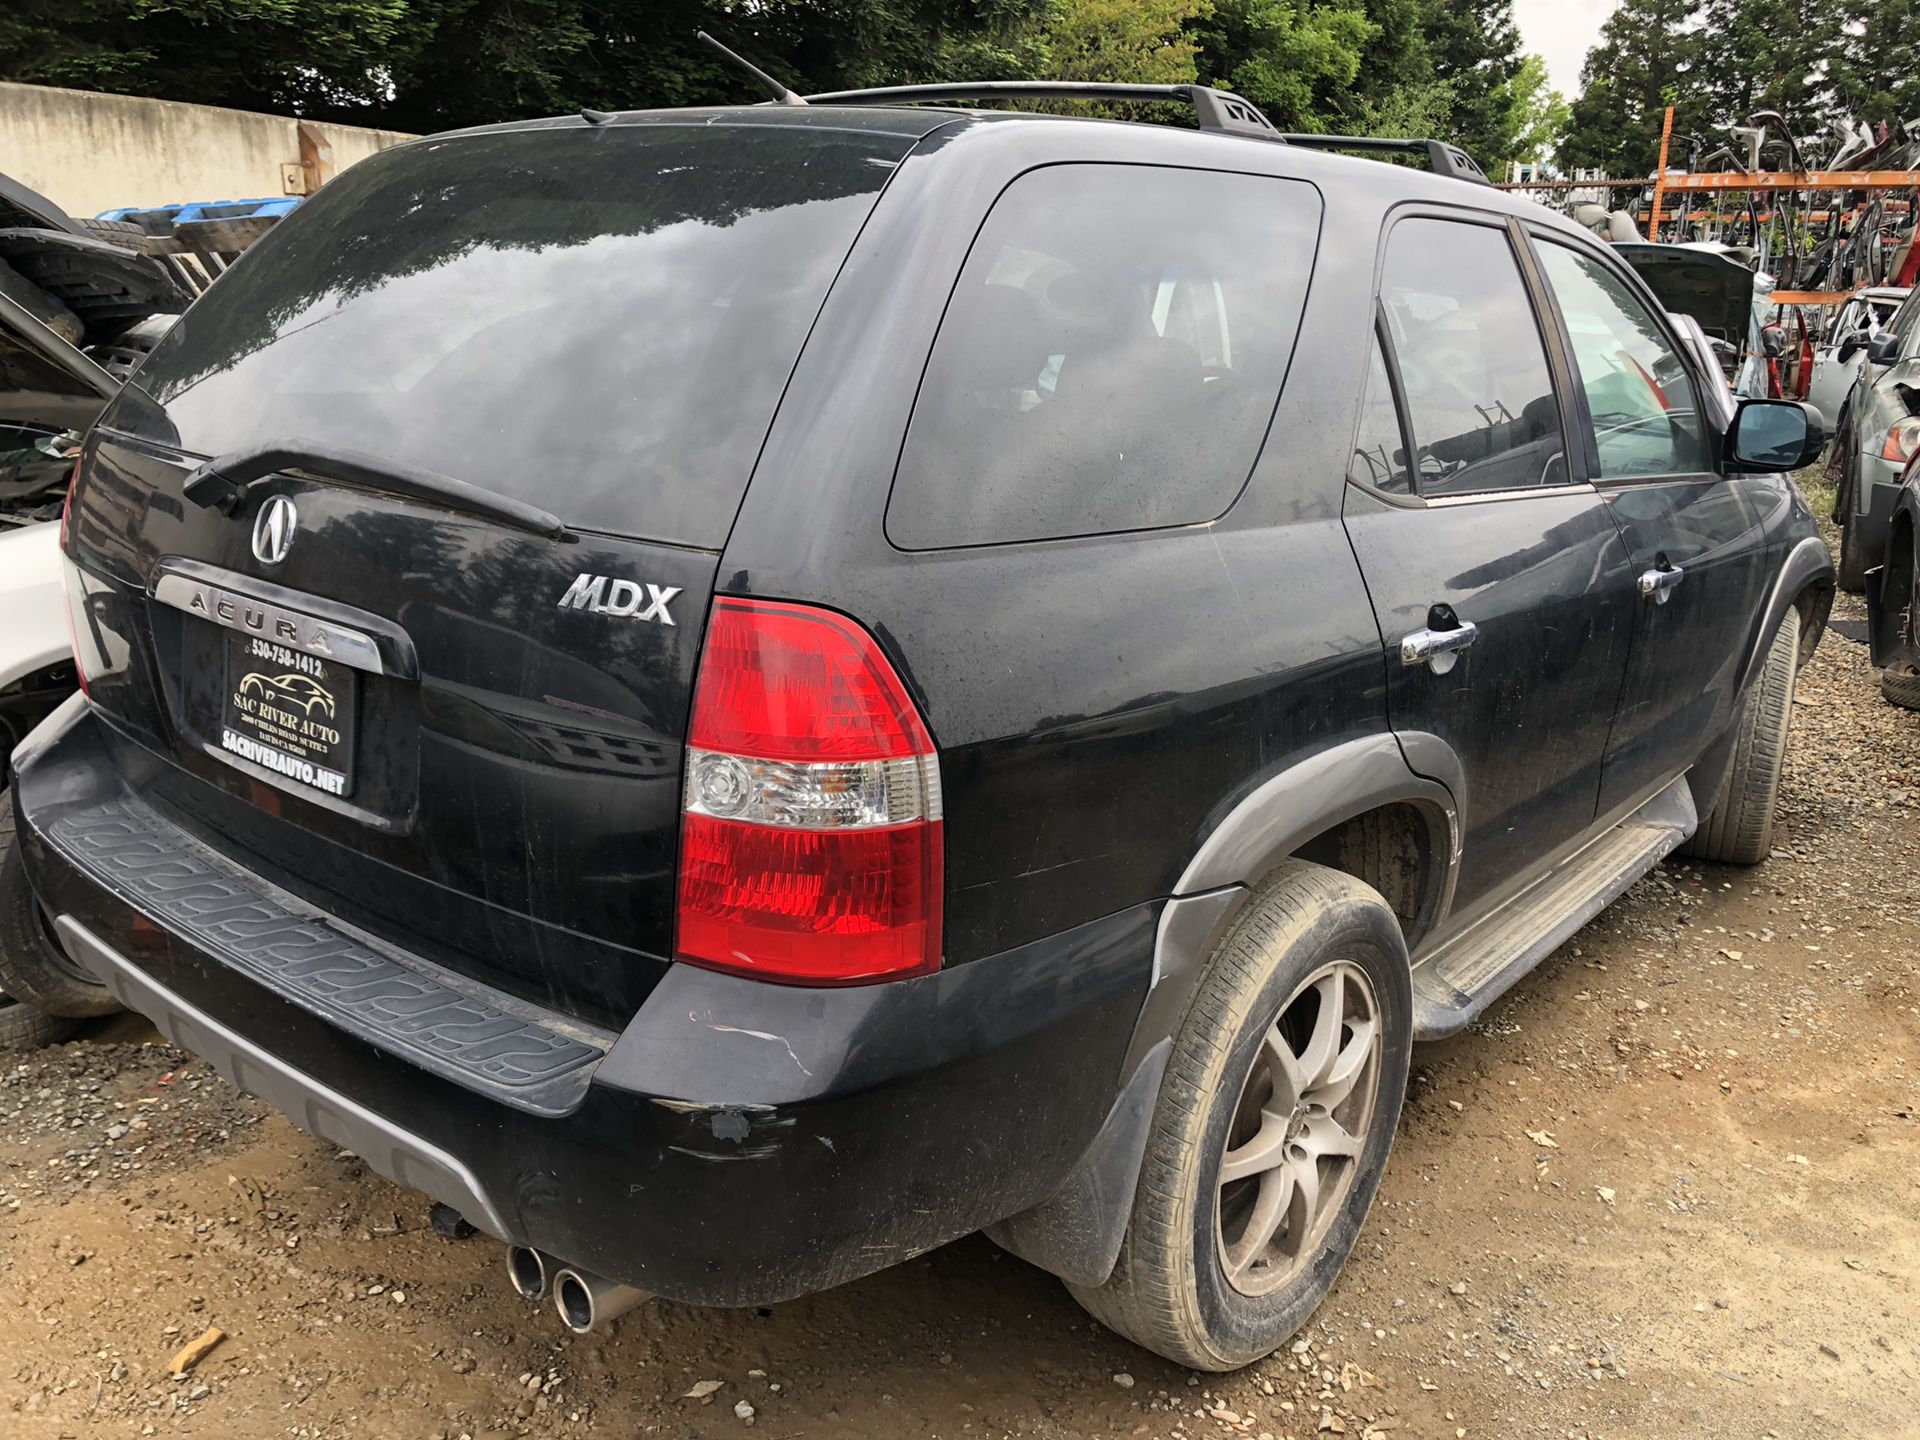 2001-2006 Acura MDX for parts, email your needs